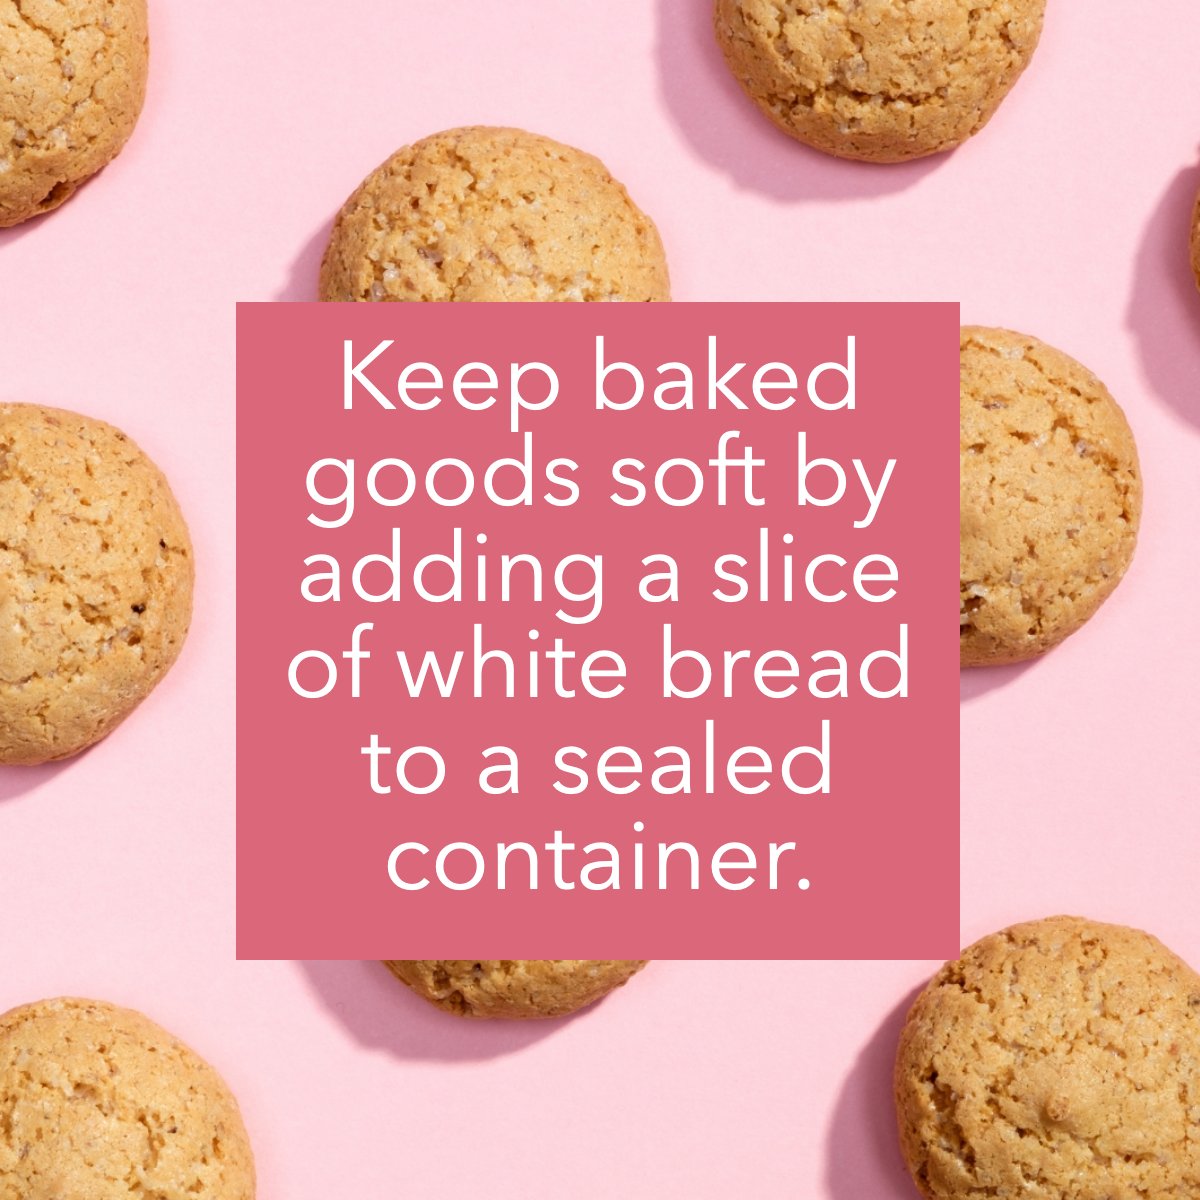 Ready for a #bakinghack?

Keep baked goods soft by adding a slice of white bread 🍞 to a sealed container.

What's the best kind of cookie 🍪? Let us know in the comments!

#cookies #pink #baking #kitchenhack #funfact #bakingtips
 #jillfitzrealestate #boston